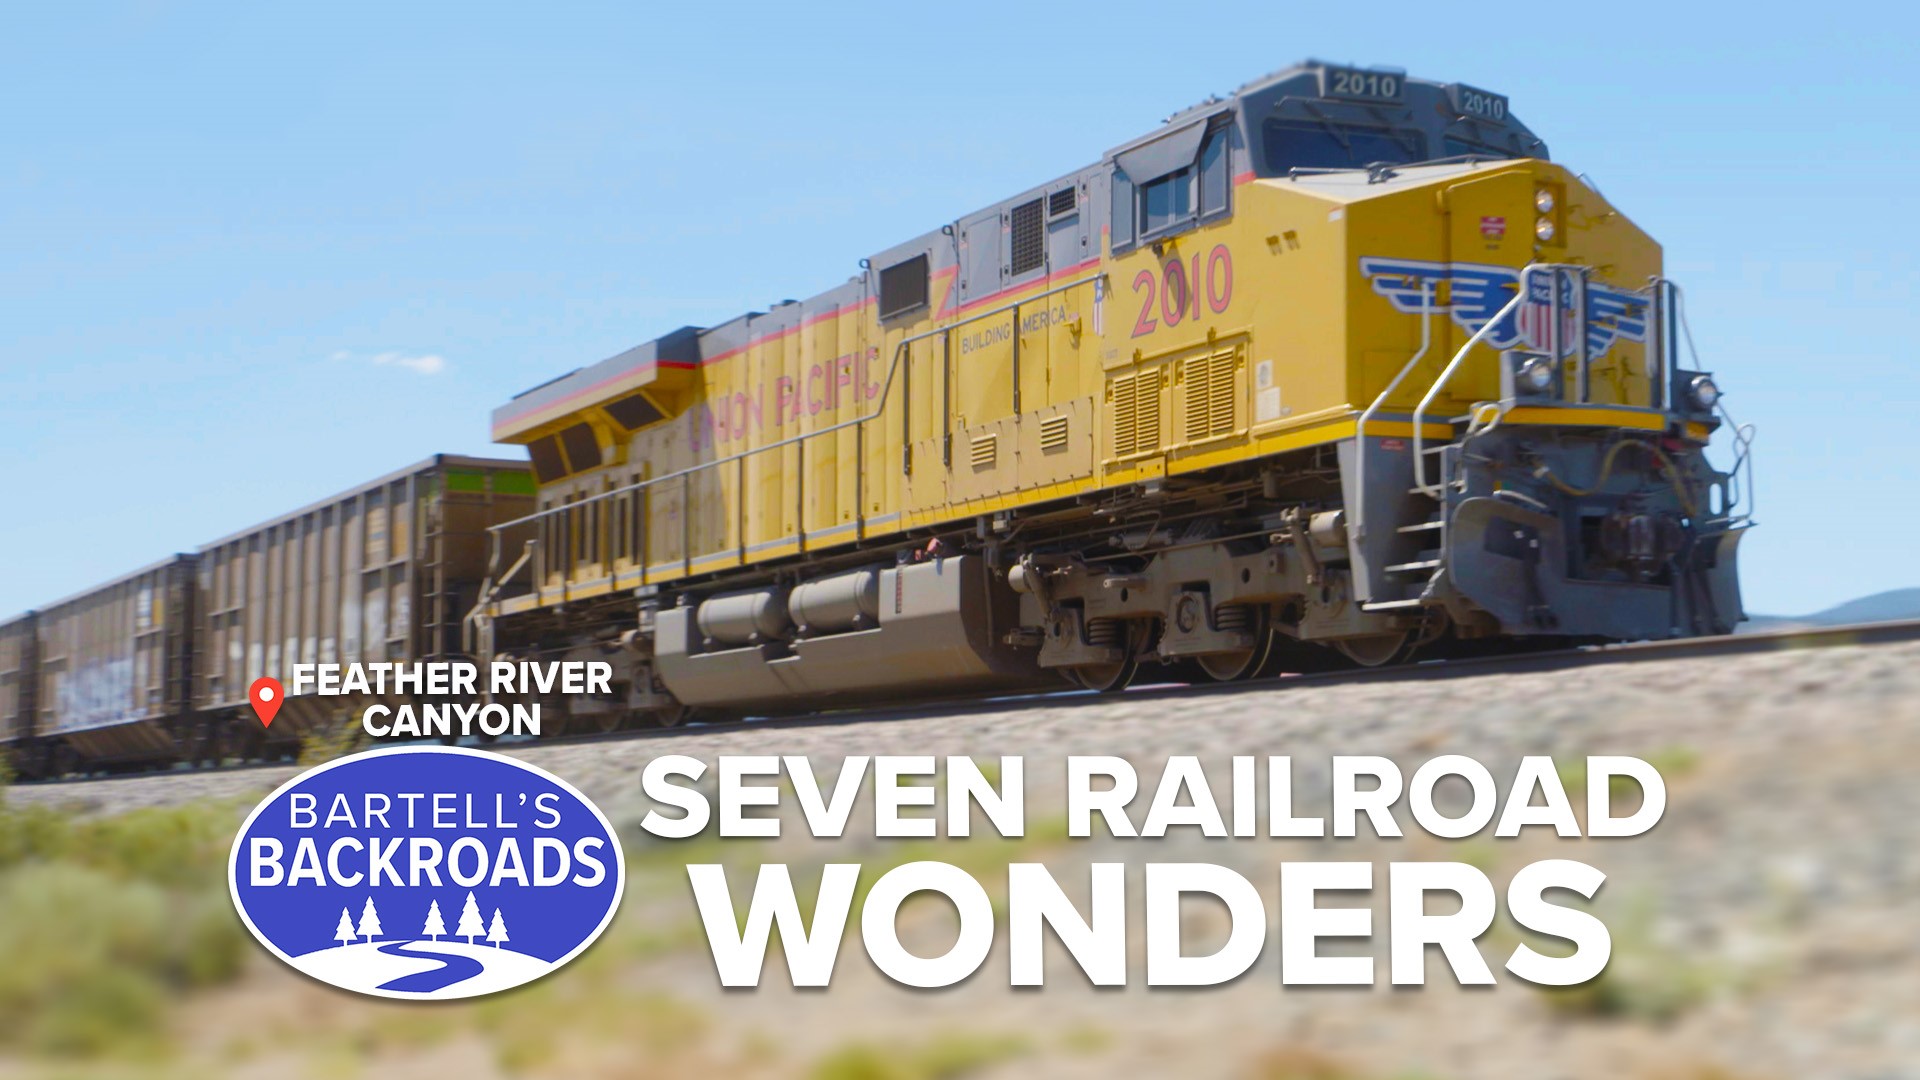 For railfans, the Feather River Canyon in Plumas County is a wonderland of iconic bridges, tunnels, and engineering innovations.